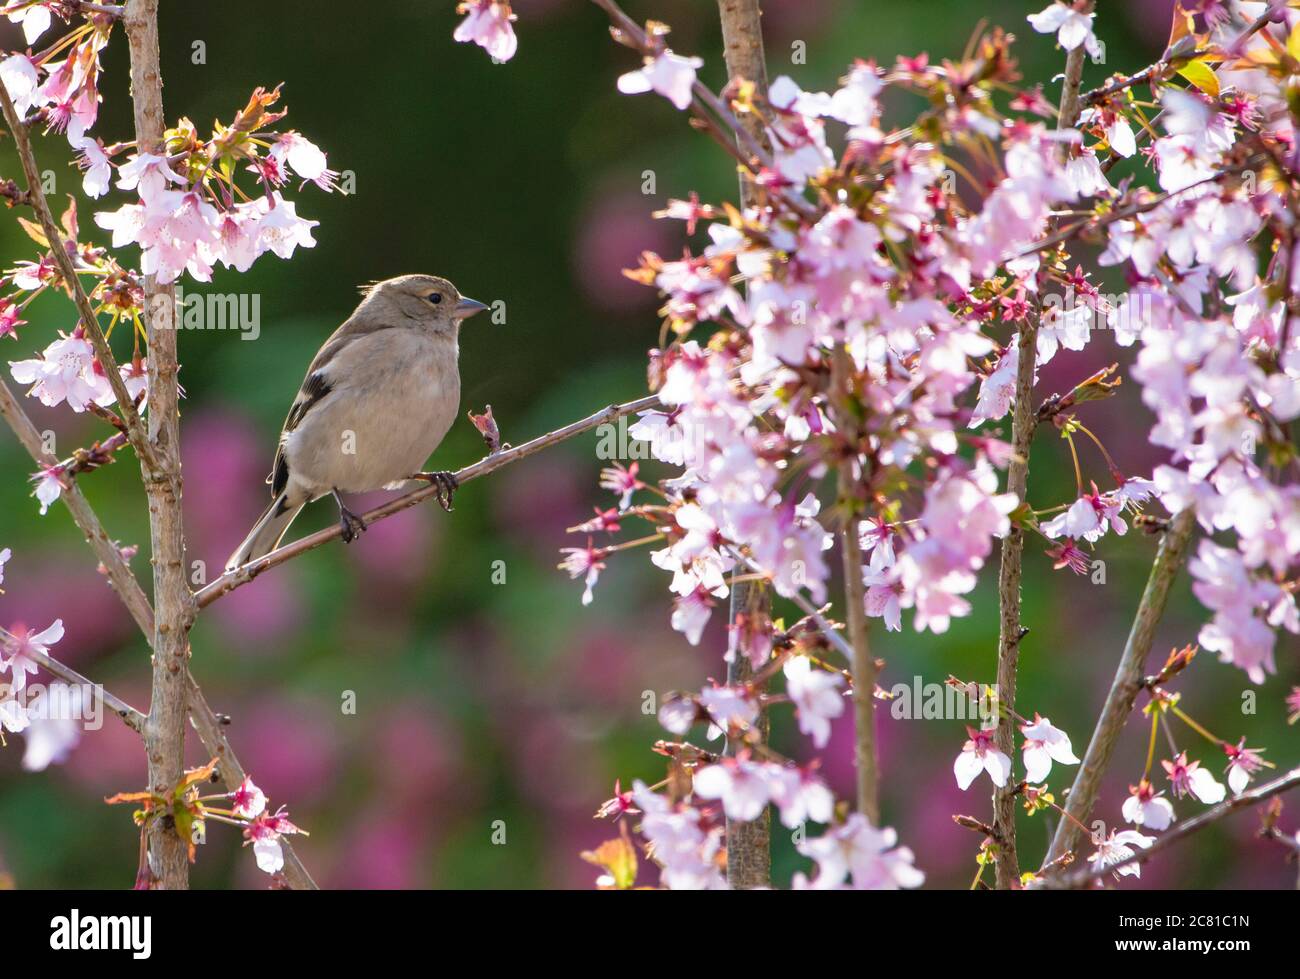 Female Chaffinch (Fringilla coelebs) perched in a tree with spring cherry blossom, Chipping, Preston, Lancashire. Stock Photo